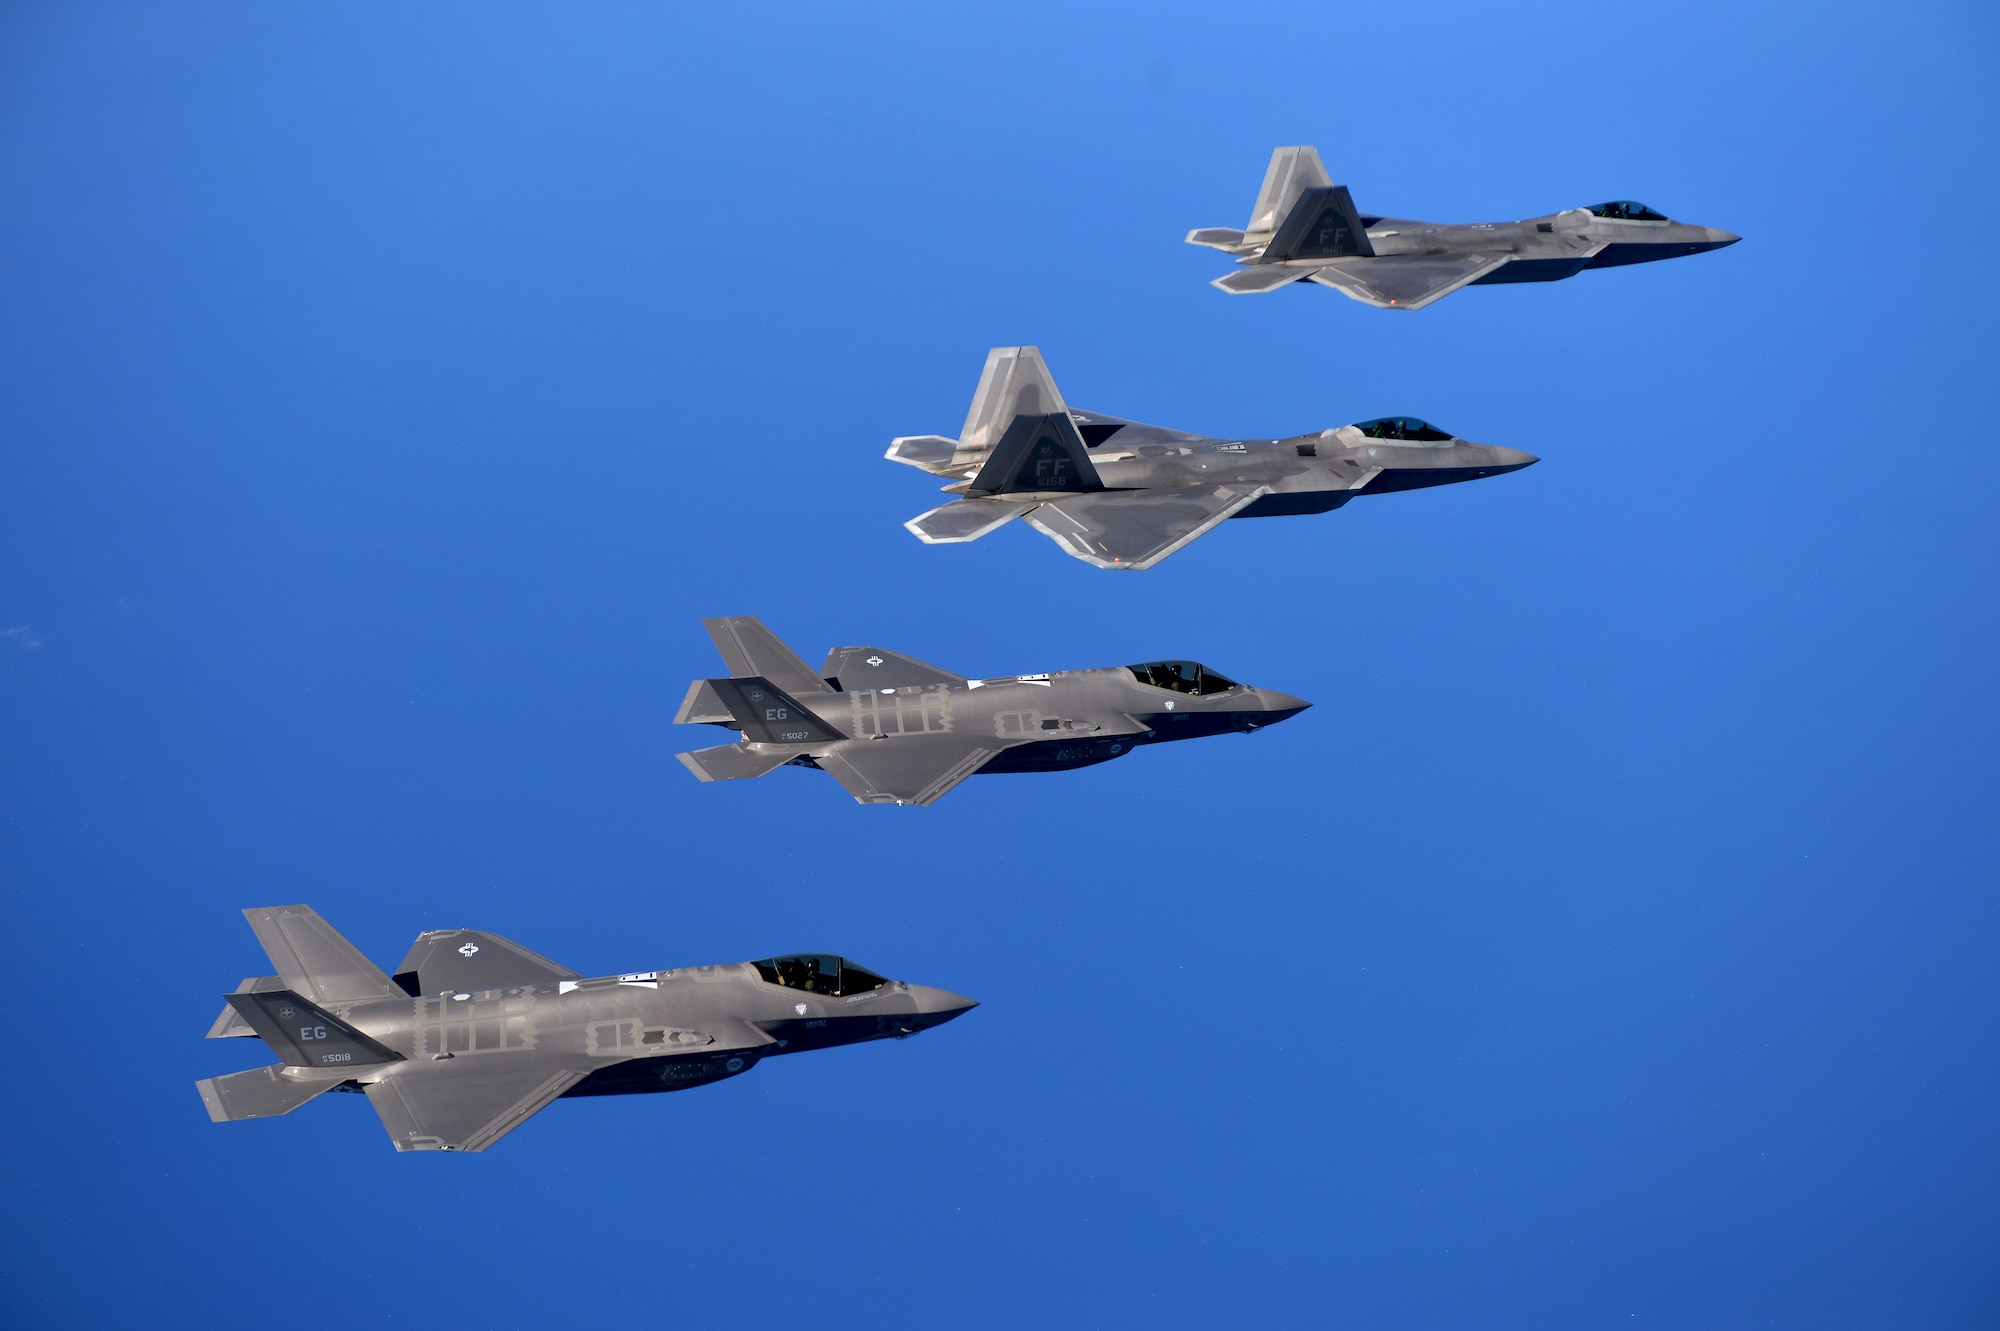 F-22 Raptors from the 94th Fighter Squadron, Joint Base Langley-Eustis, Virginia, and F-35A Lightning IIs from the 58th Fighter Squadron, Eglin Air Force Base, Florida, fly in formation after completing an integration training mission over the Eglin Training Range, Florida, Nov. 5, 2014. The purpose of the training was to improve integrated employment of fifth-generation assets and tactics. The F-35s and F-22s flew offensive counter air, defensive counter air and interdiction missions, maximizing effects by employing fifth-generation capabilities together. (U.S. Air Force photo/Master Sgt. Shane A. Cuomo)